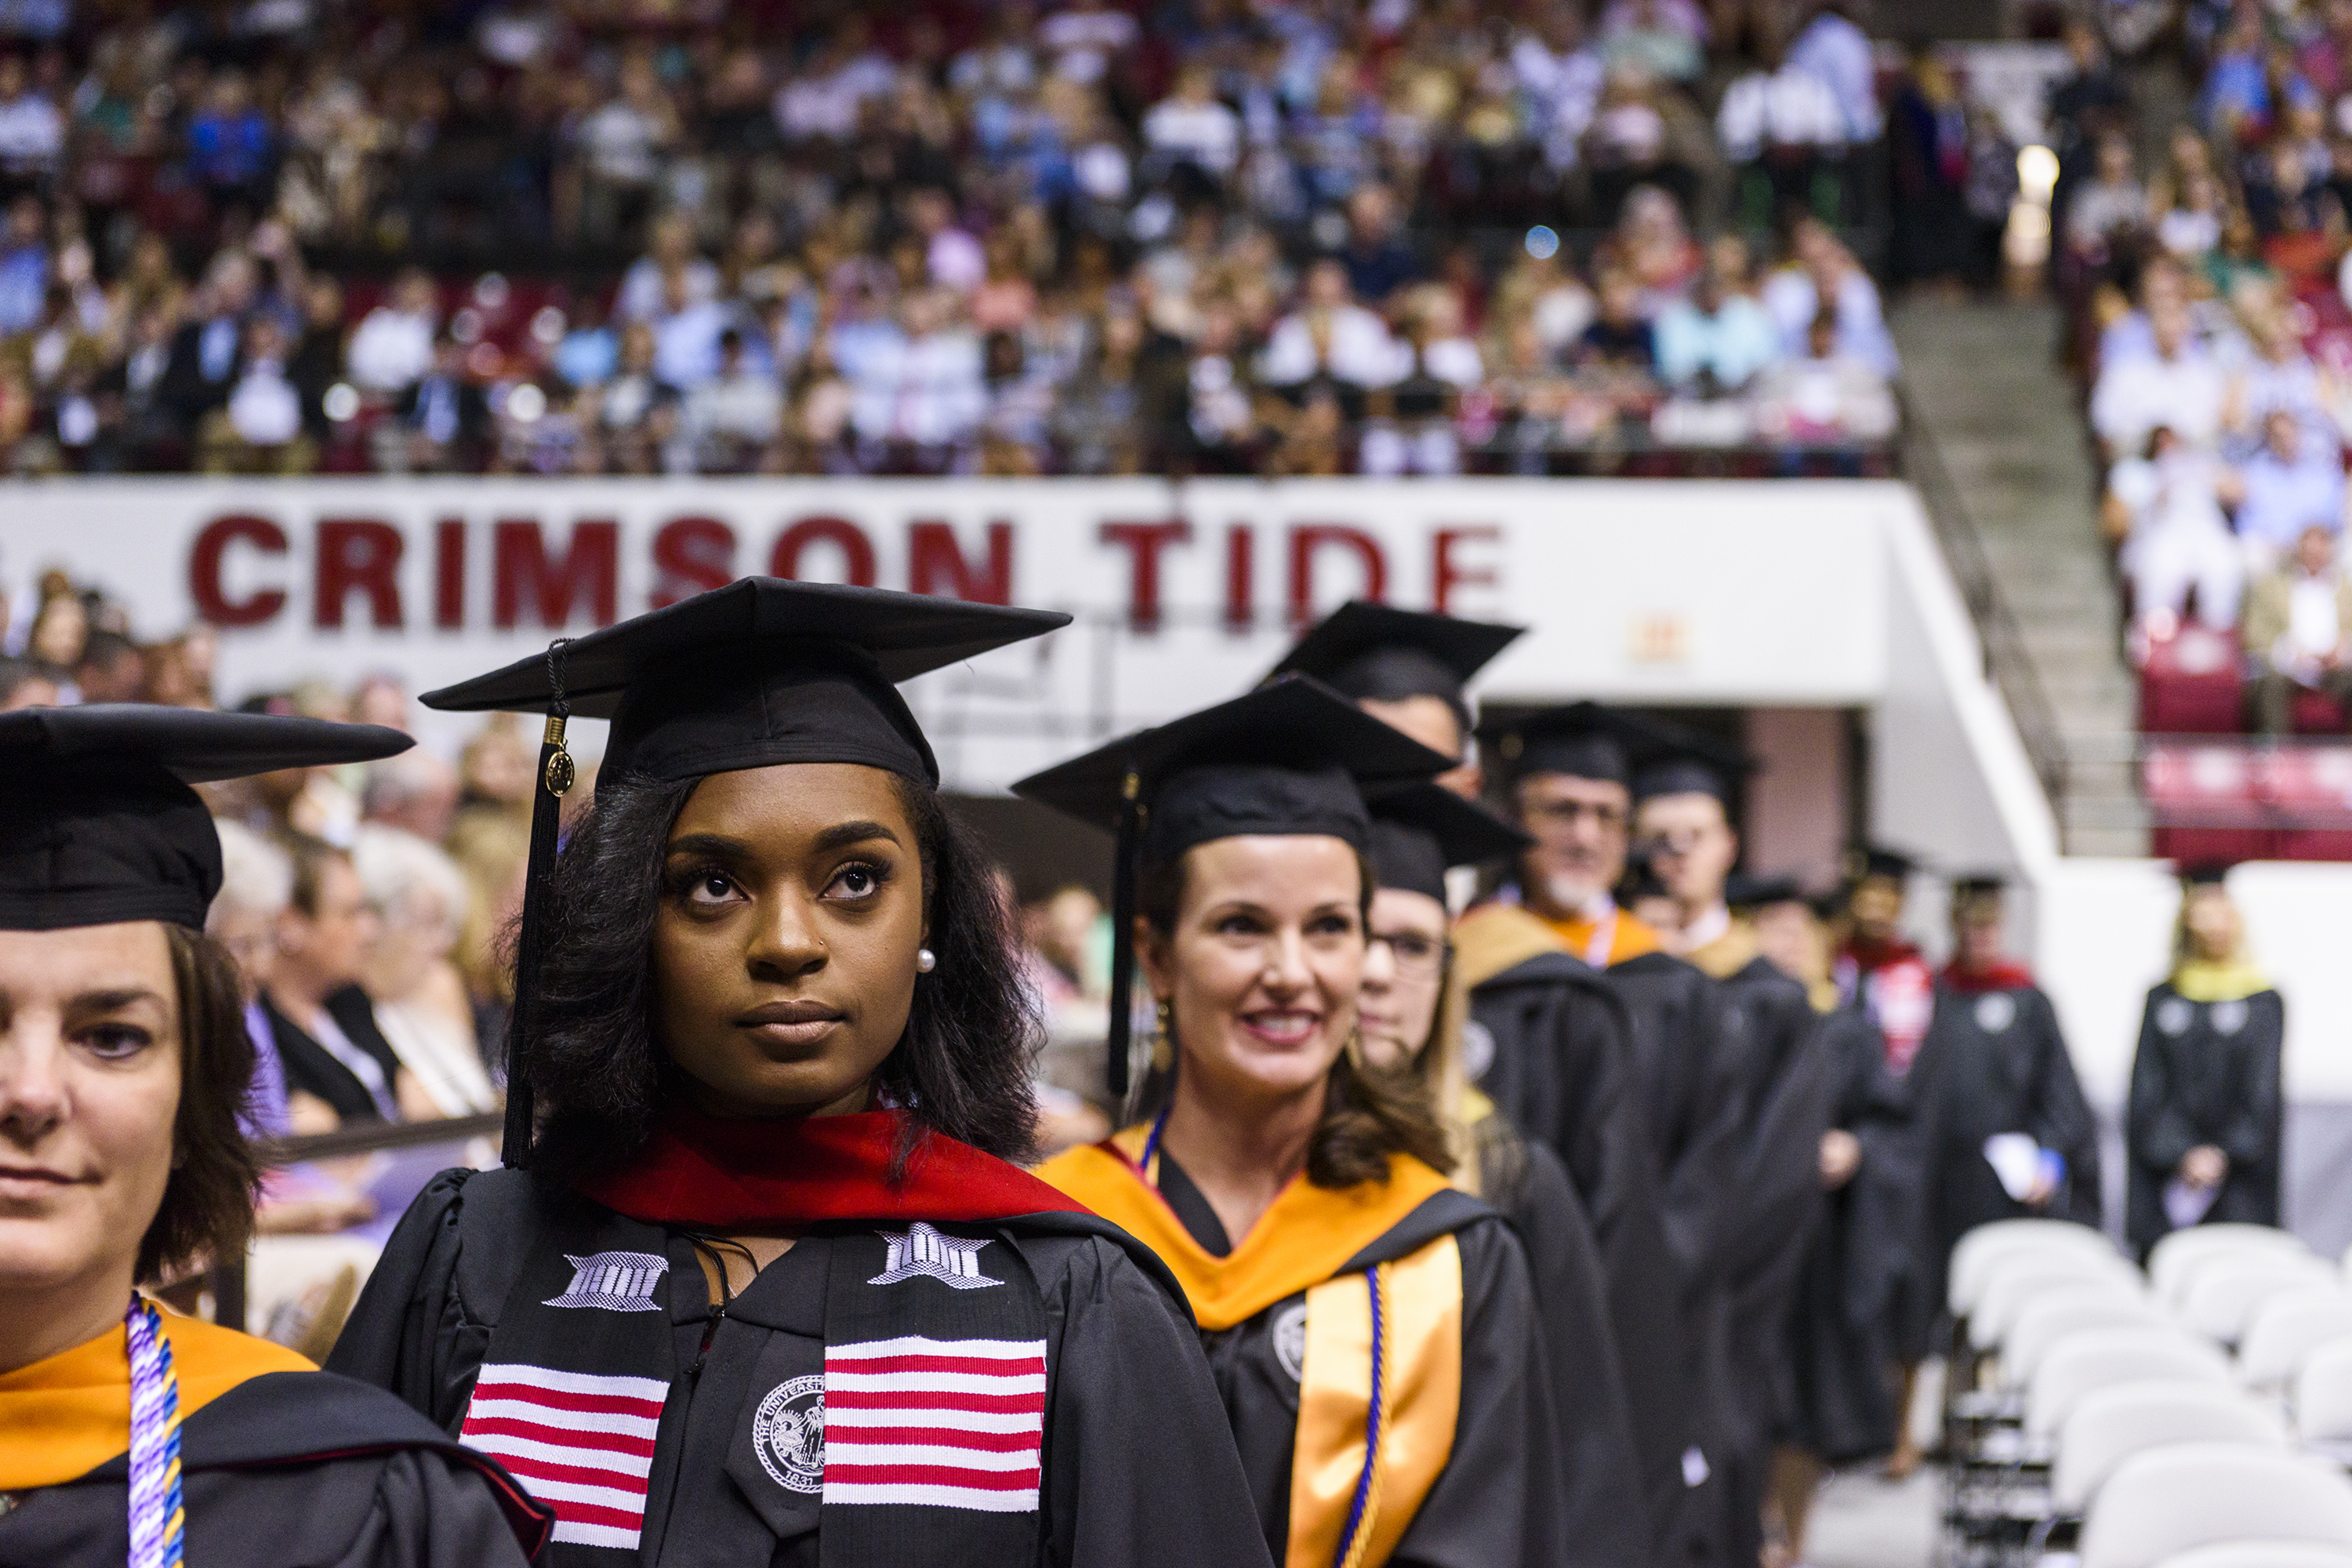 UA to Hold Winter Commencement Exercises Dec. 16